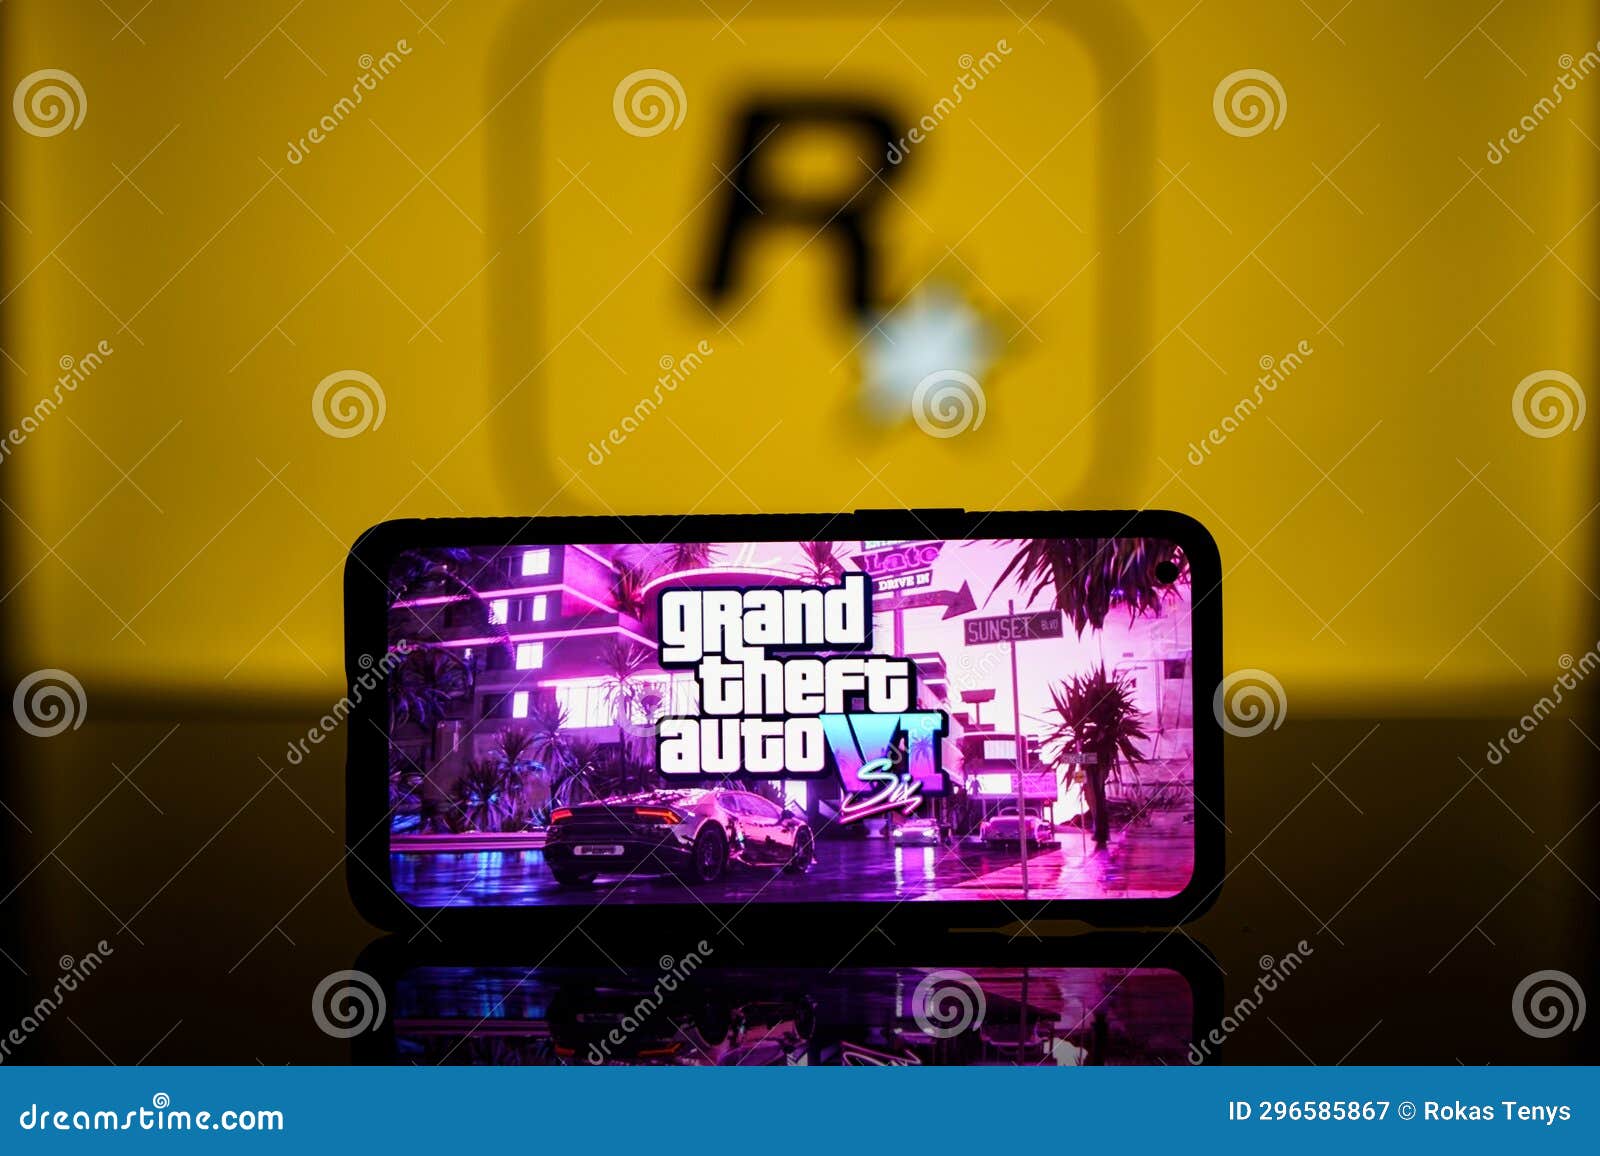 Rockstar North Stock Photos - Free & Royalty-Free Stock Photos from  Dreamstime